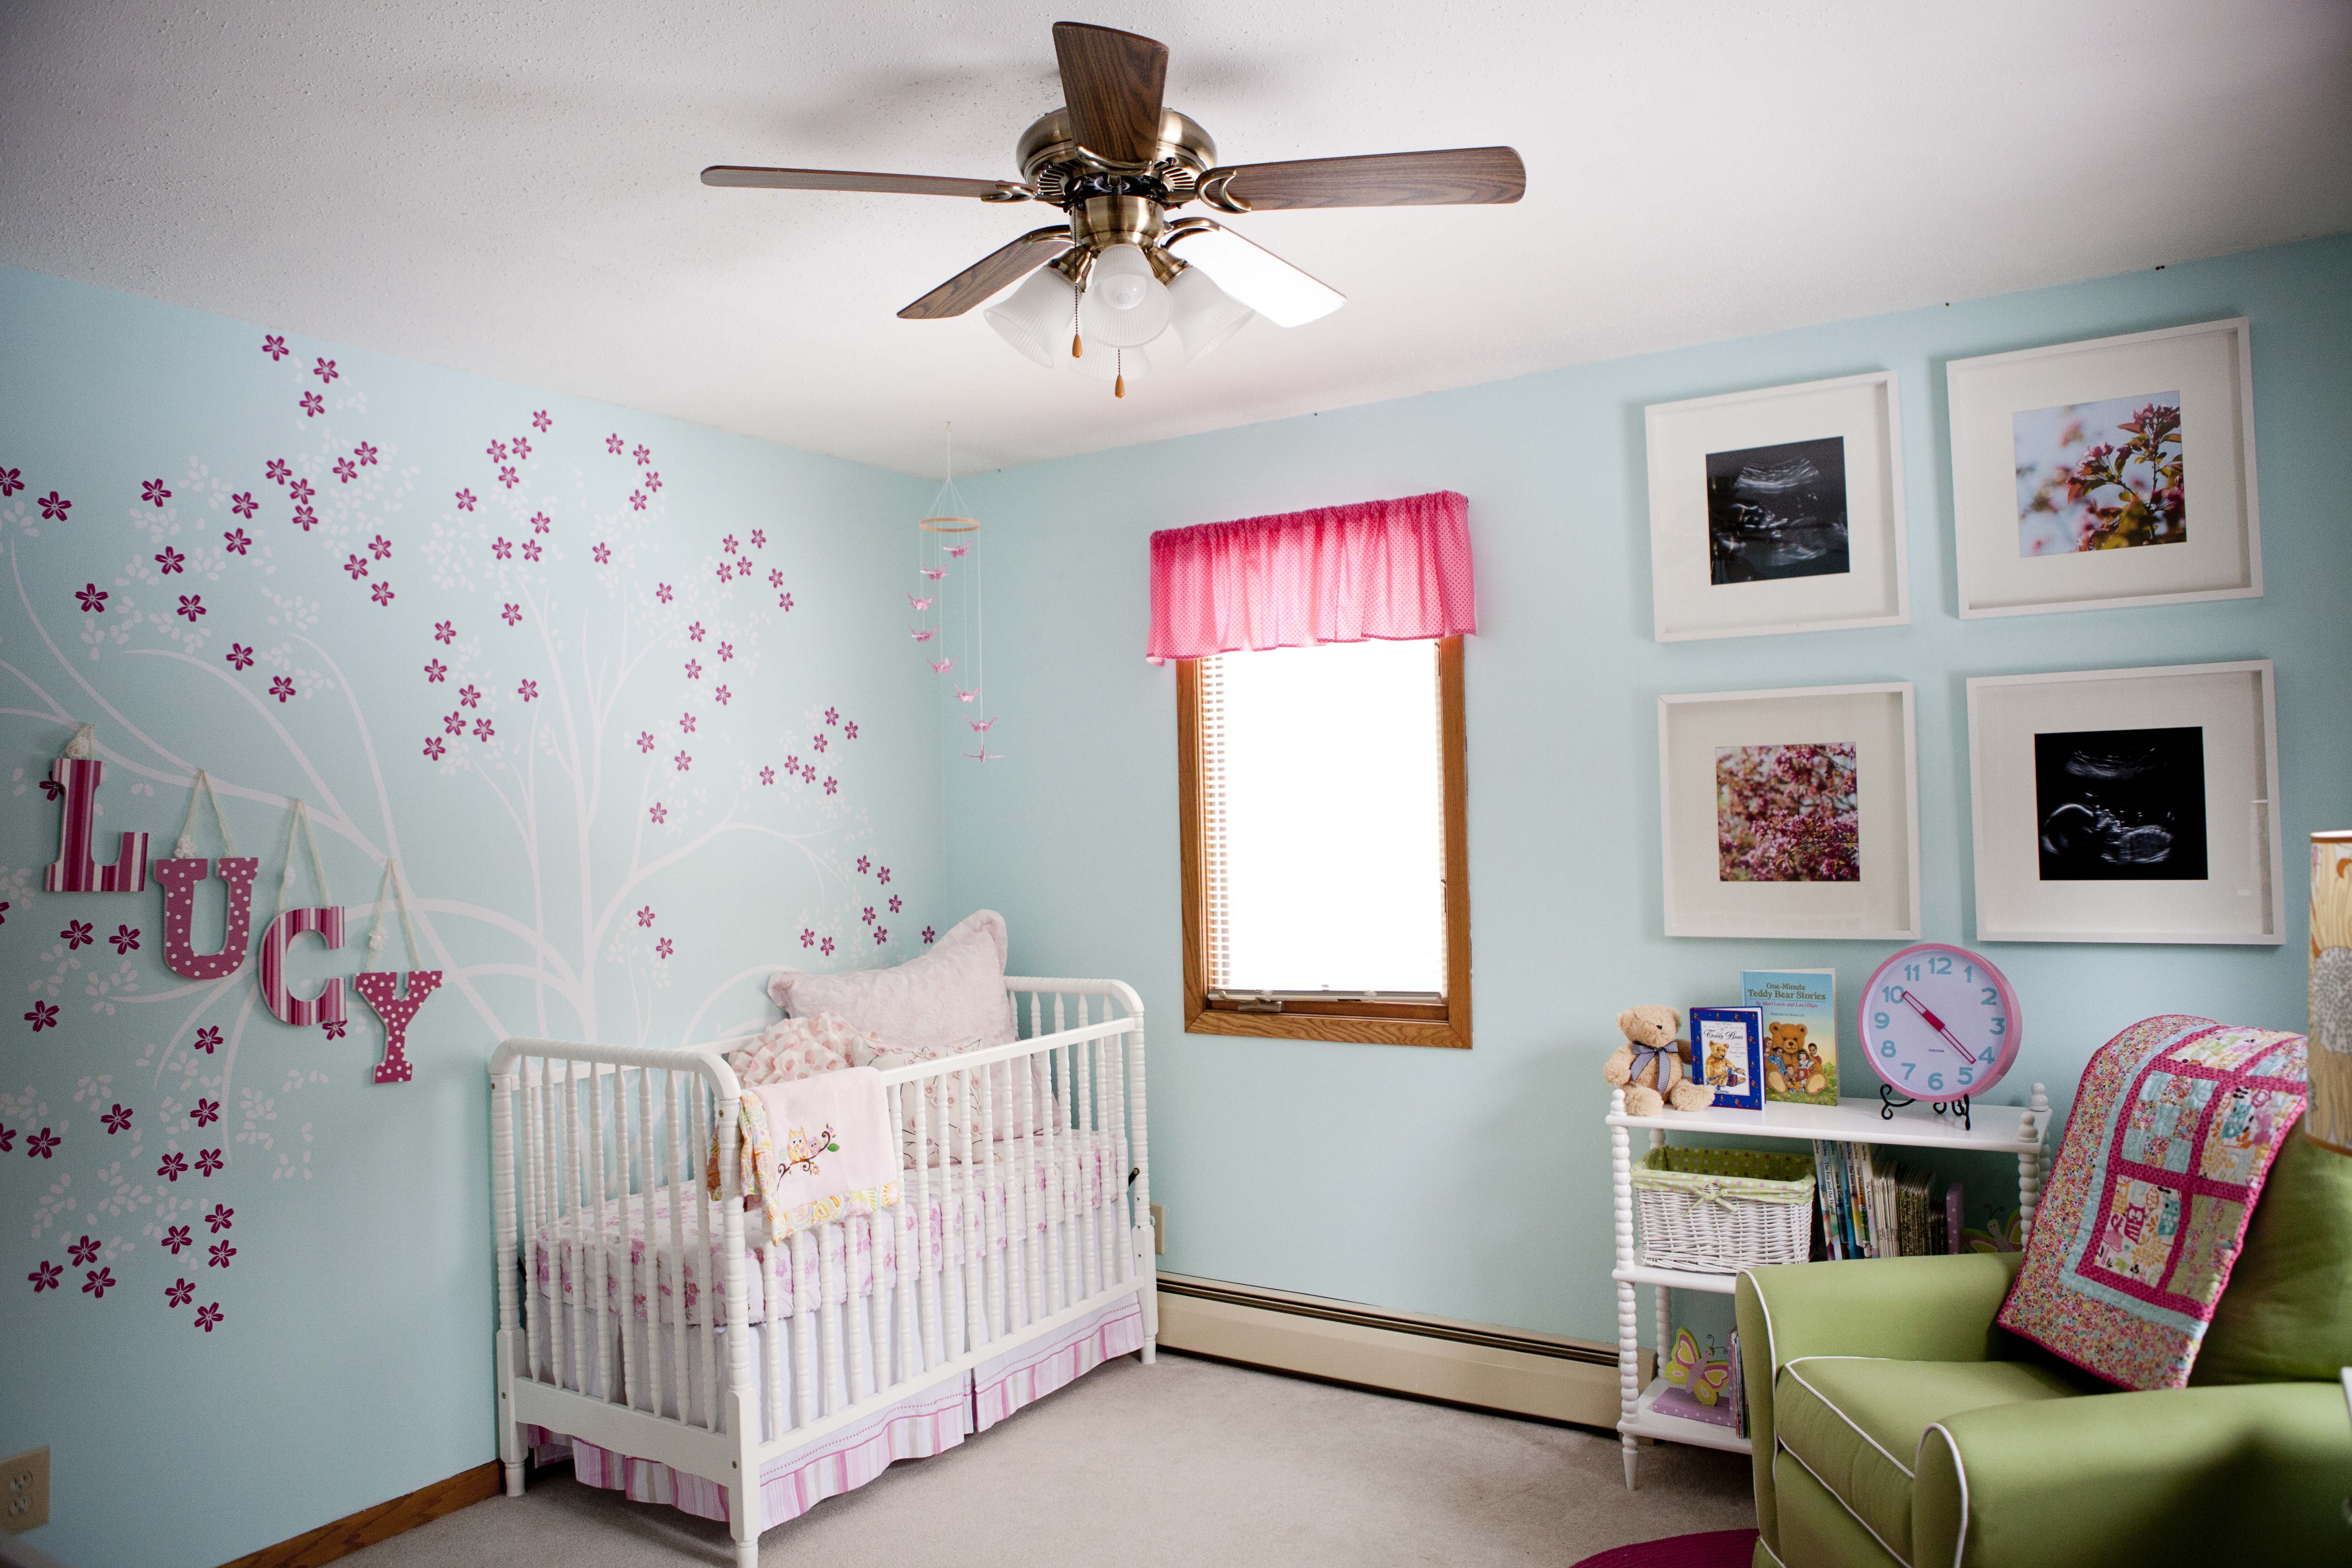 Little Lucy's Whimsy Room - Project Nursery